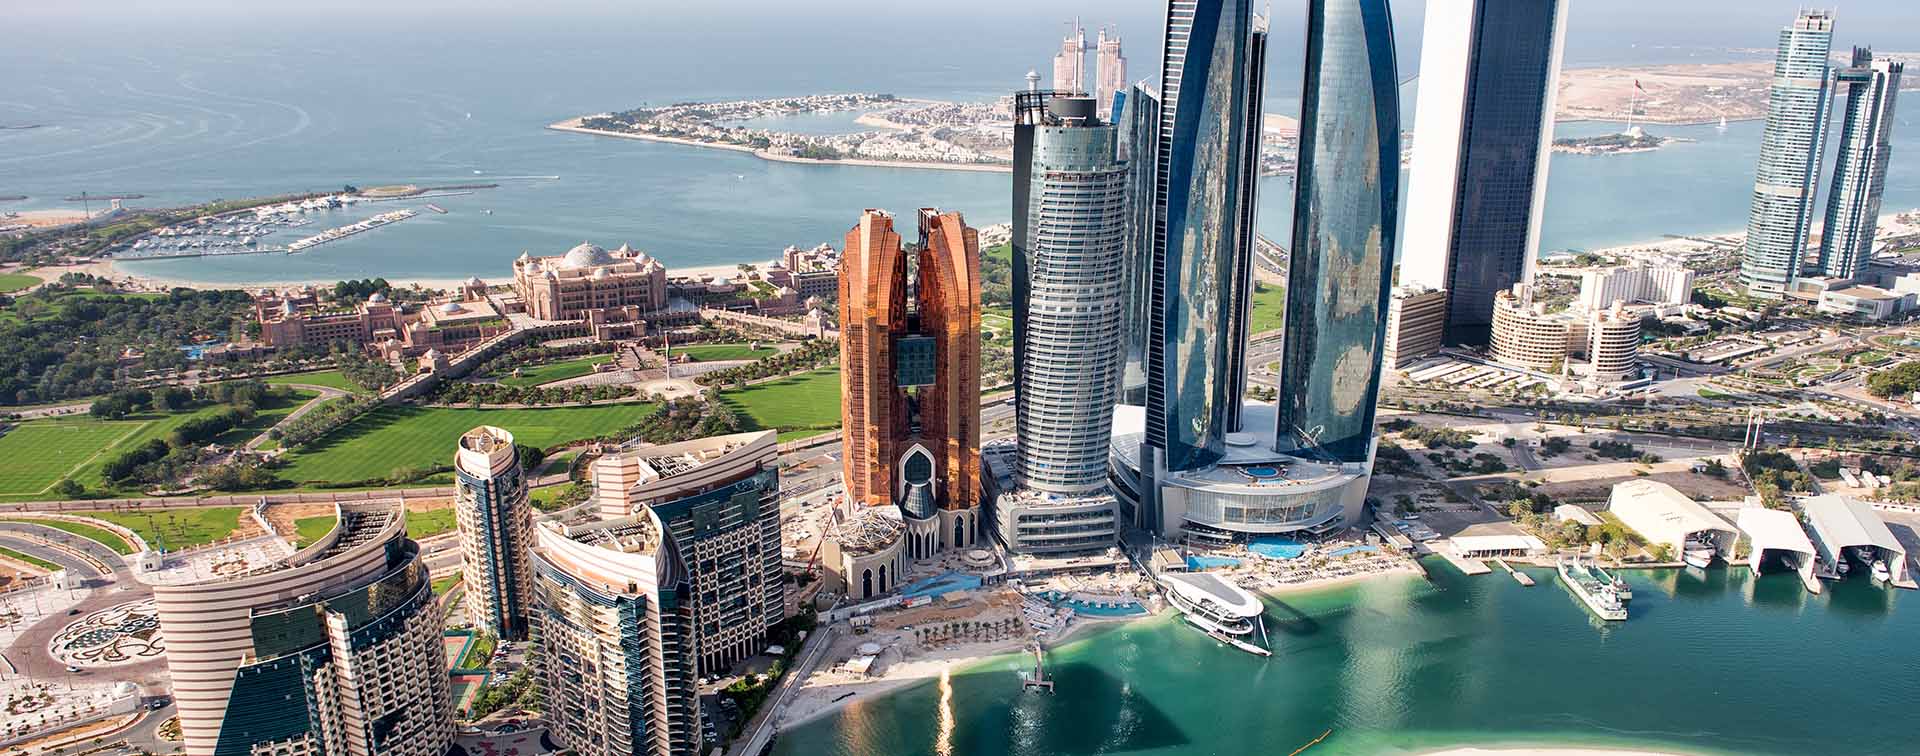 Aerial view of famous buildings on Abu Dhabi skyline